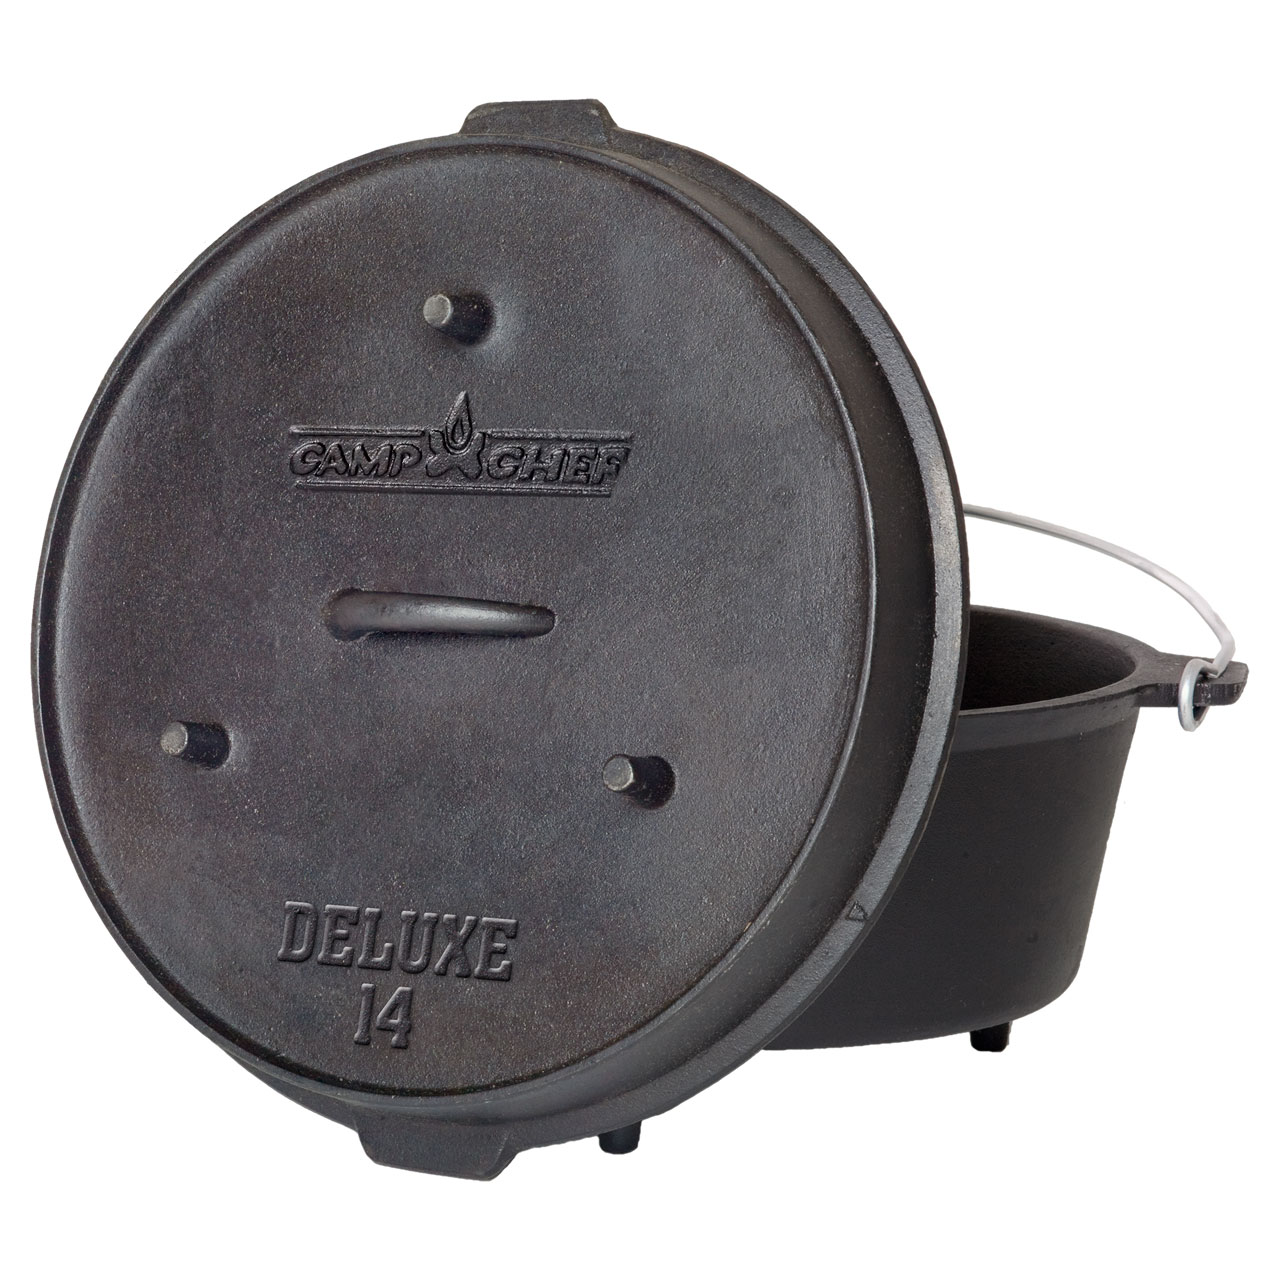 Camp Chef 14'' Deluxe Dutch Oven